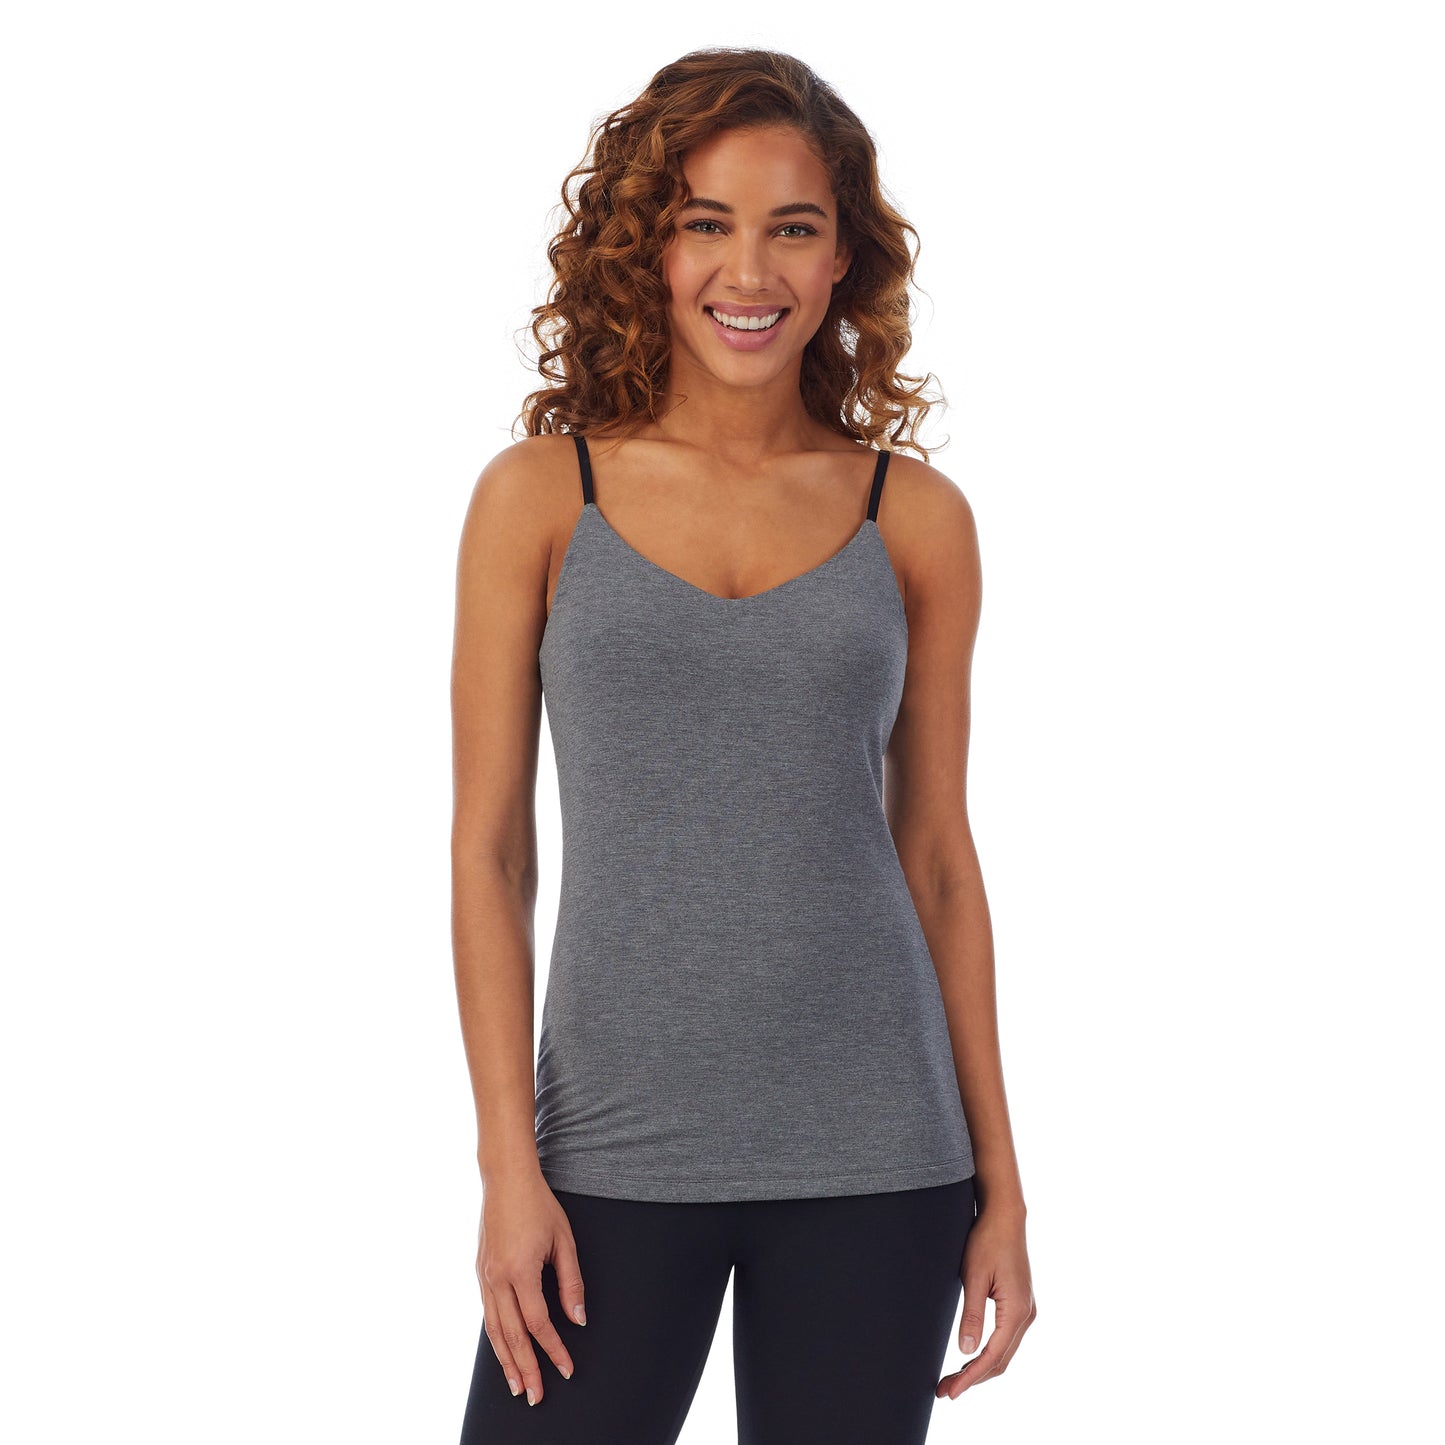 Charcoal Heather; Model is wearing size S. She is 5’9”, Bust 34”, Waist 23”, Hips 35”. @A lady wearing a charcoal heather cami.